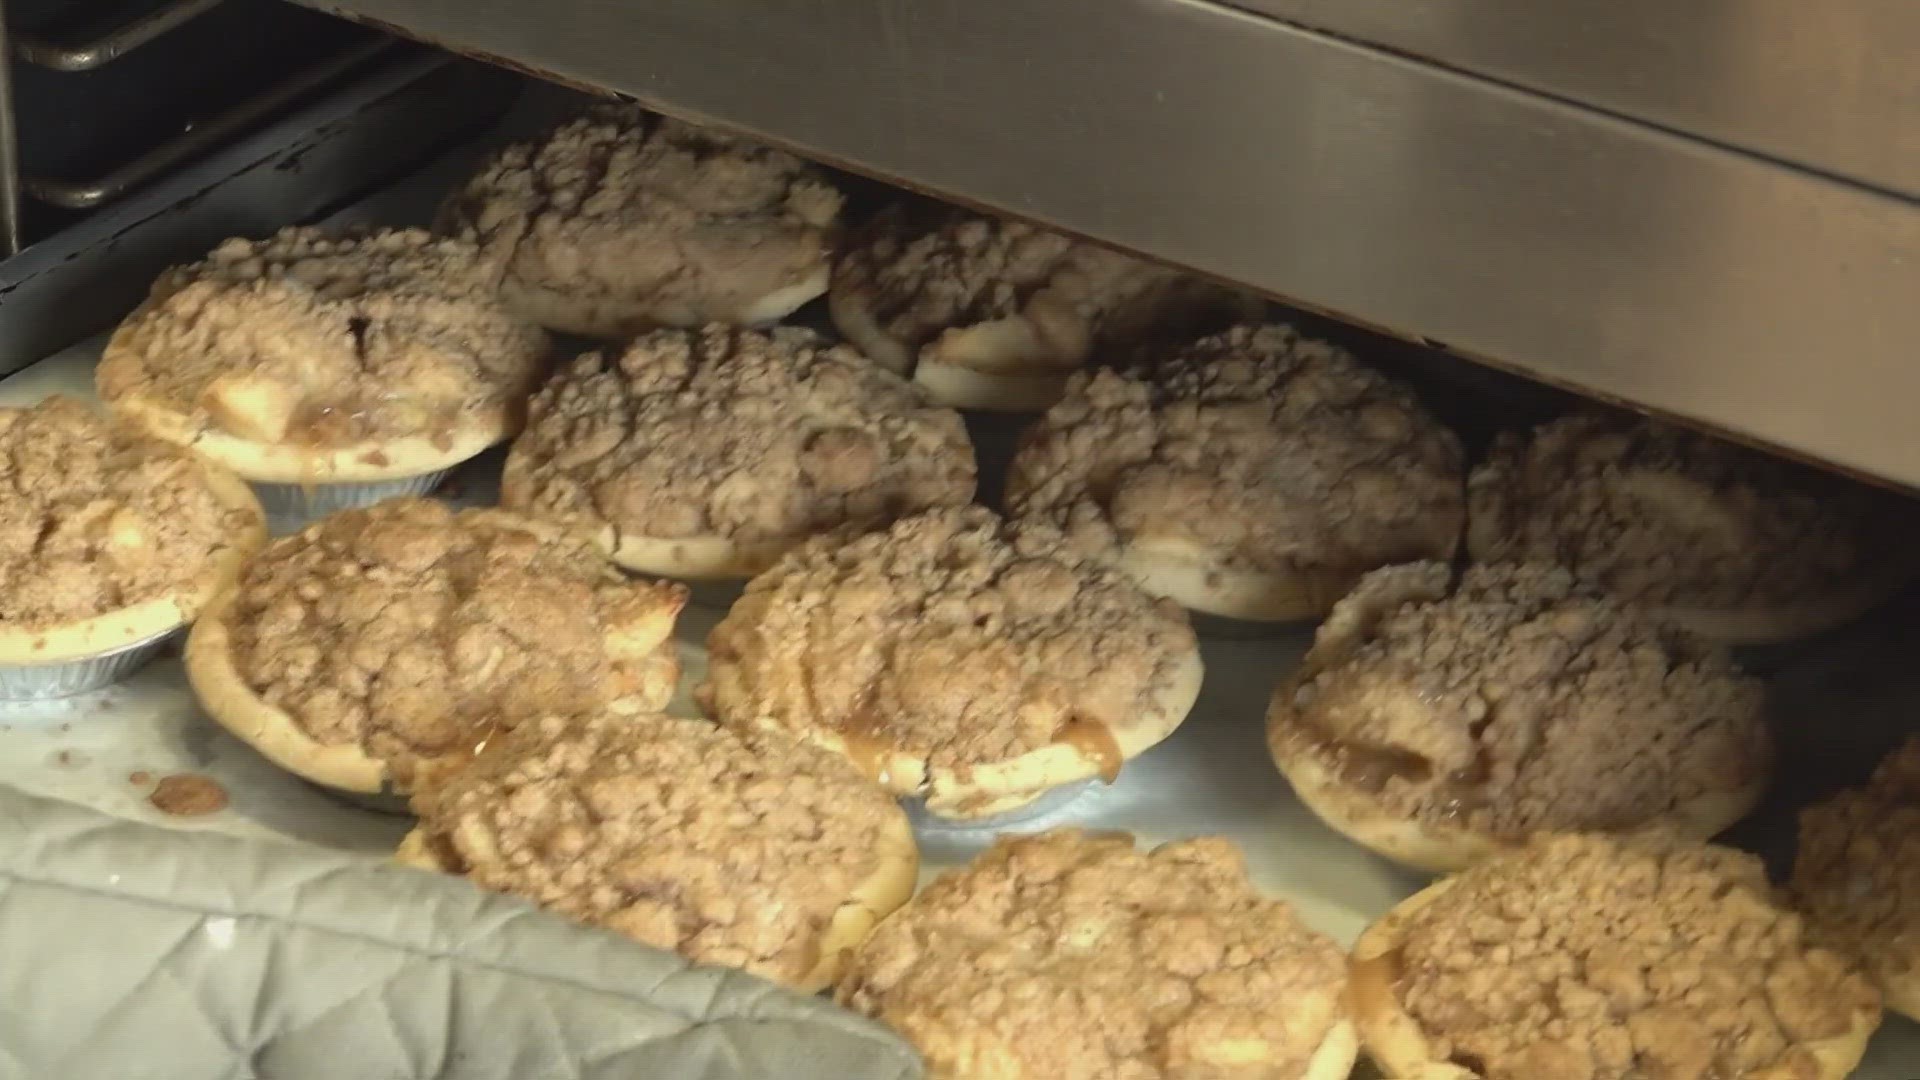 People in Knoxville marked the occasion by flocking to a local bakery The Buttermilk Sky Pie Shop.